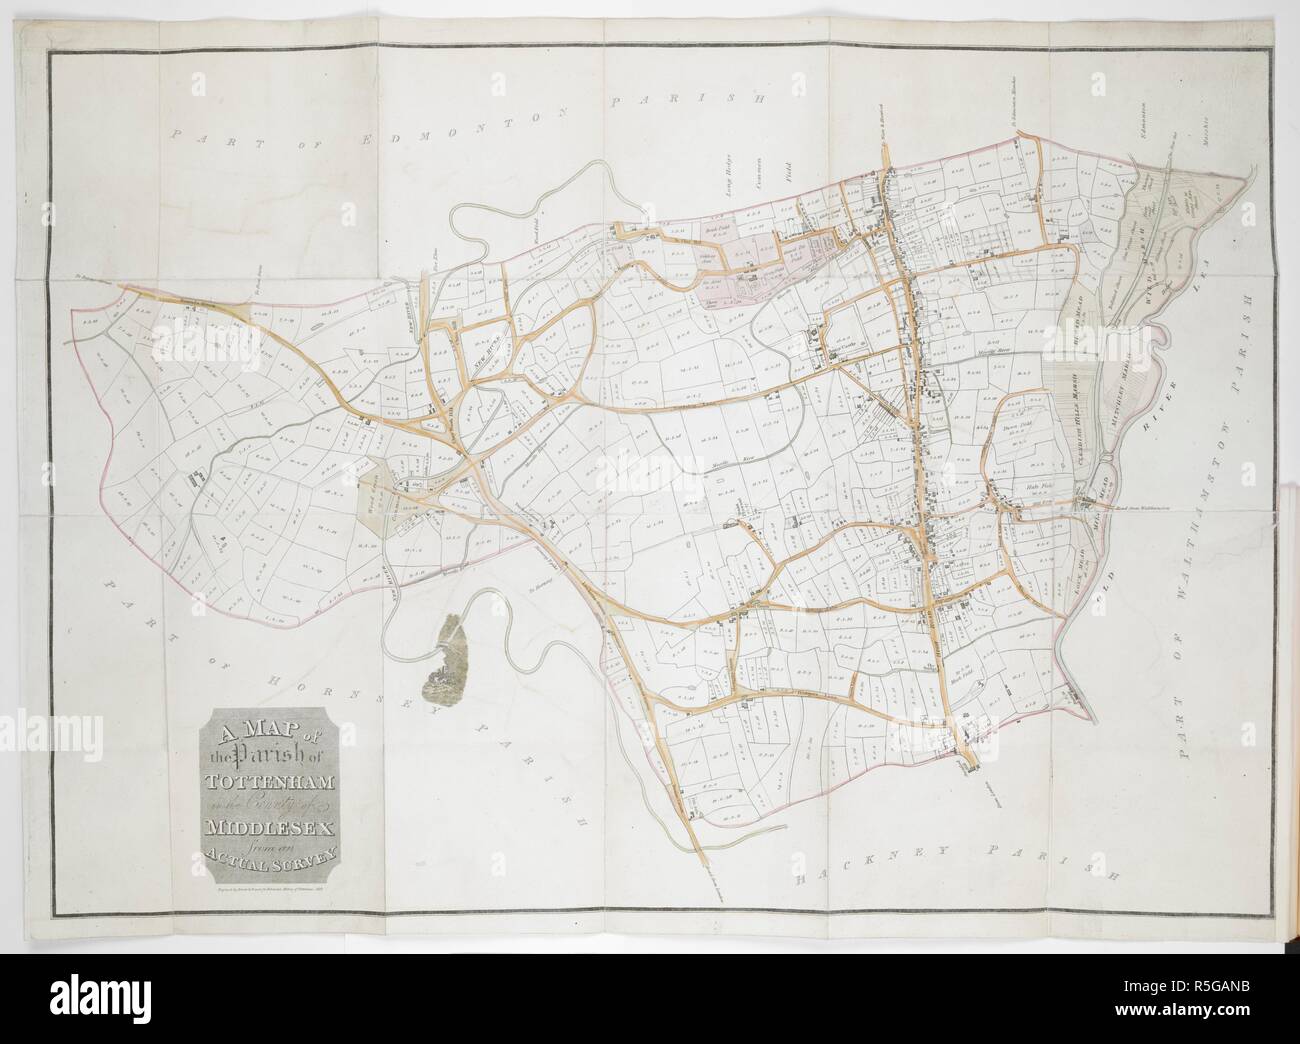 A map of Tottenham. A Map of the Parish of Tottenham in the County of  Middlesex from an actual survey. Tottenham, 1818. Source: 577.d.26.  Language: English Stock Photo - Alamy